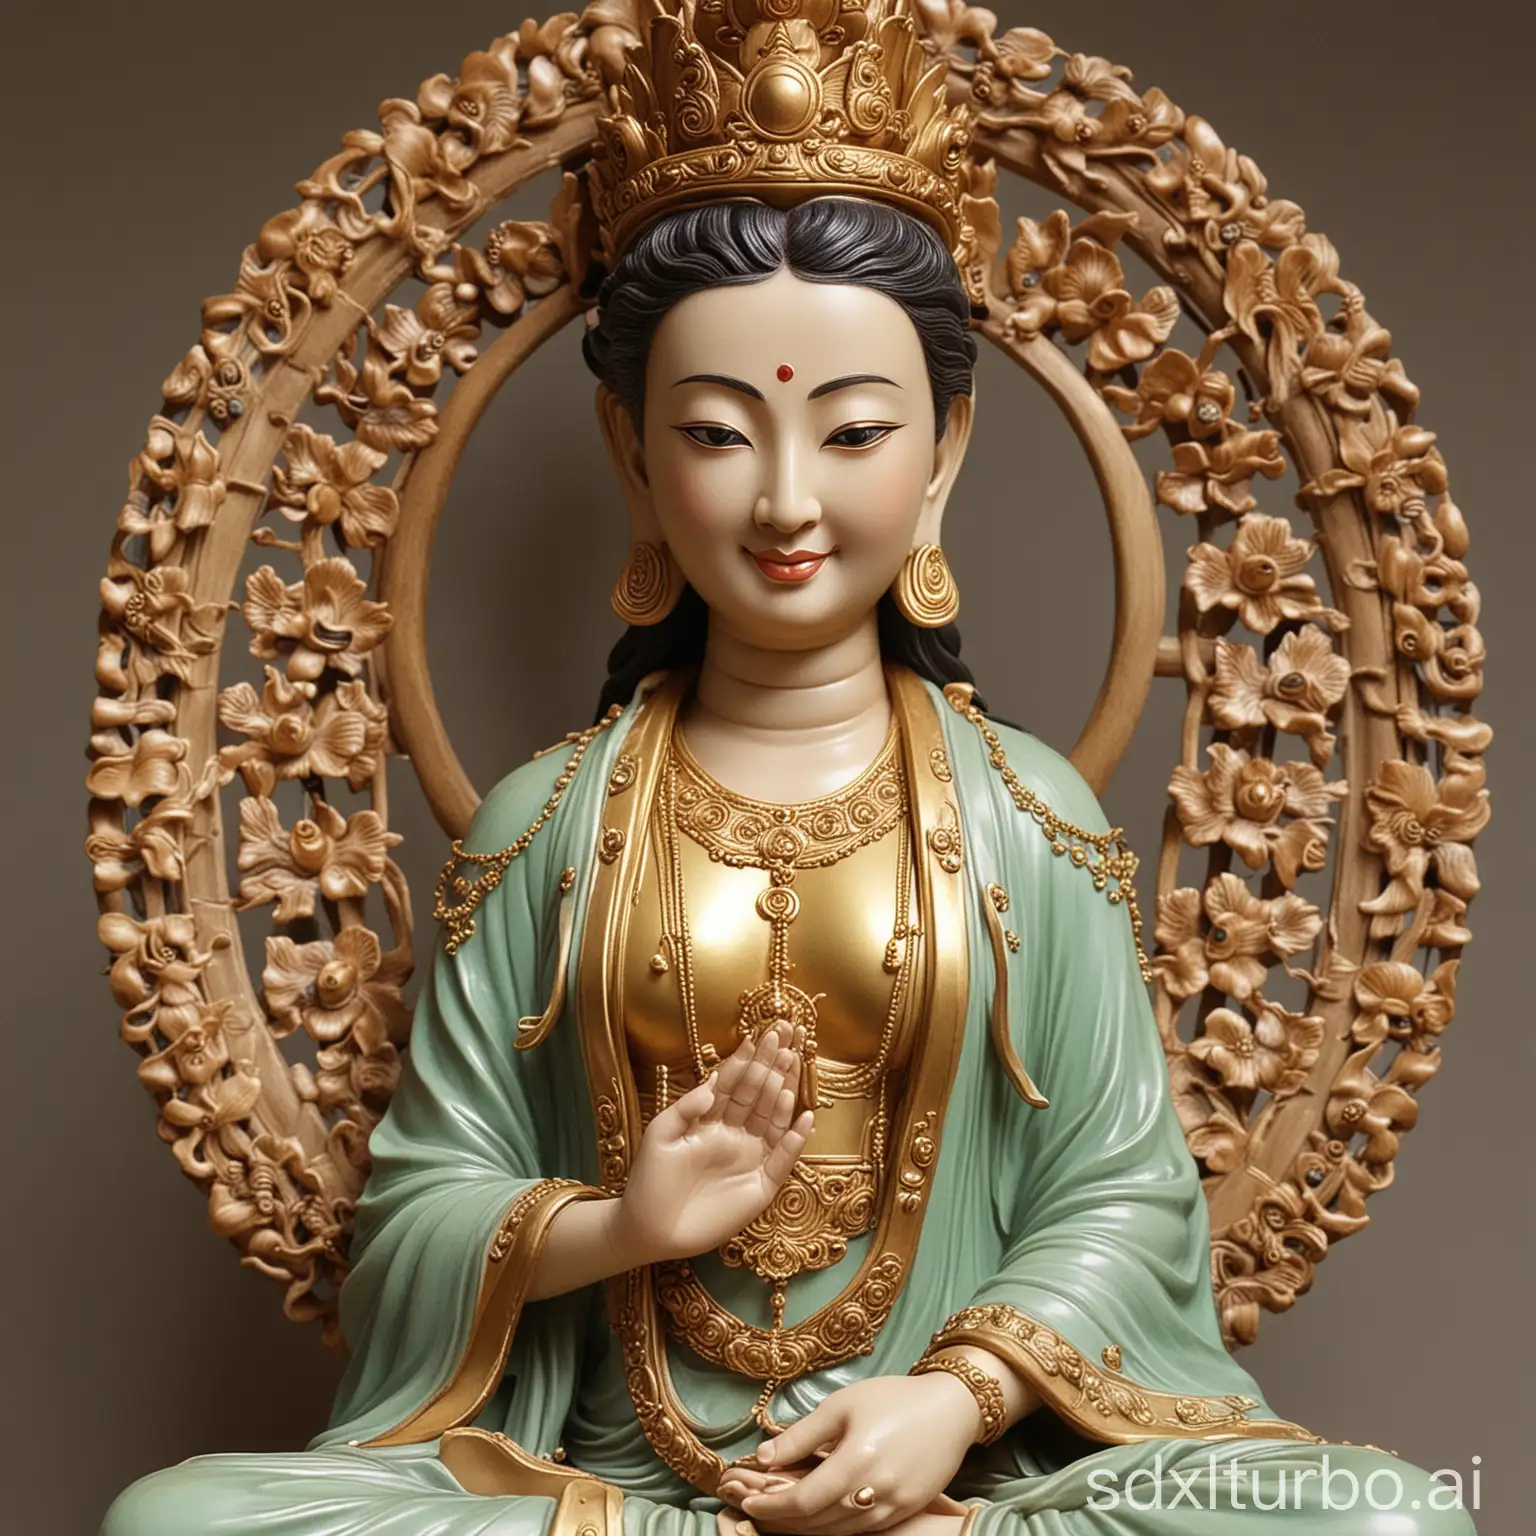 Guanyin Bodhisattva has beautiful features, often with a smiling face and kind eyes. Their eyes are wide open, filled with wisdom and compassion, giving people a sense of warmth and tranquility.